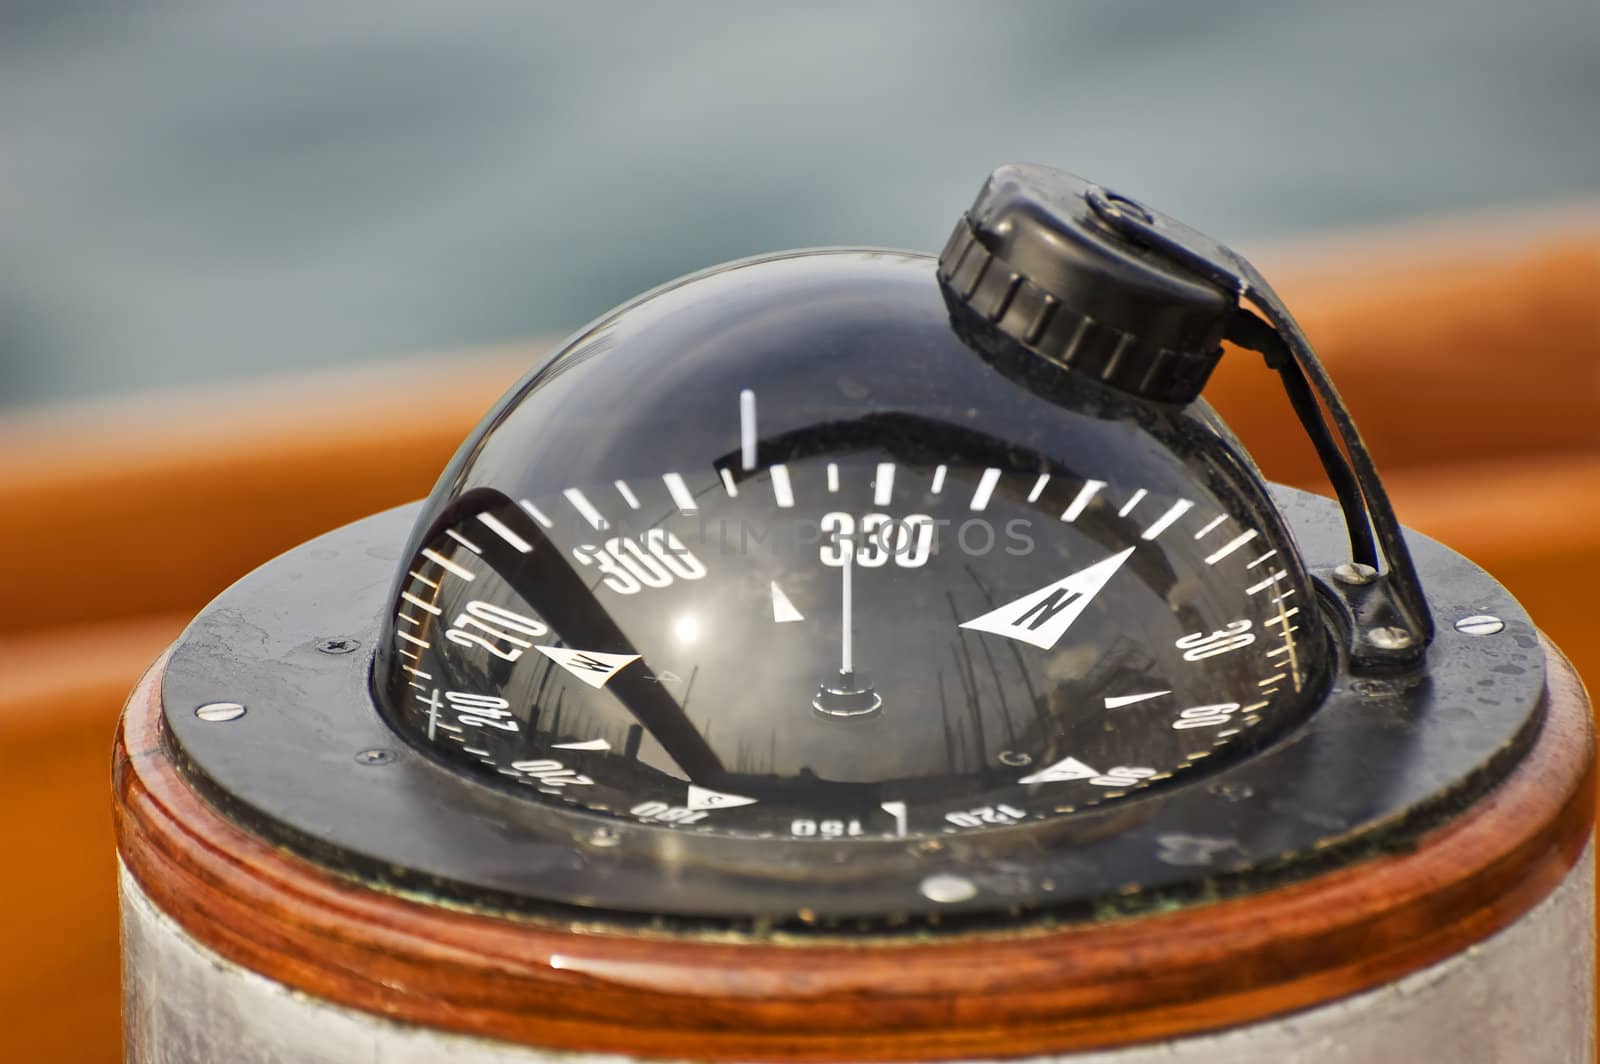 A big compass on a boat showing direction